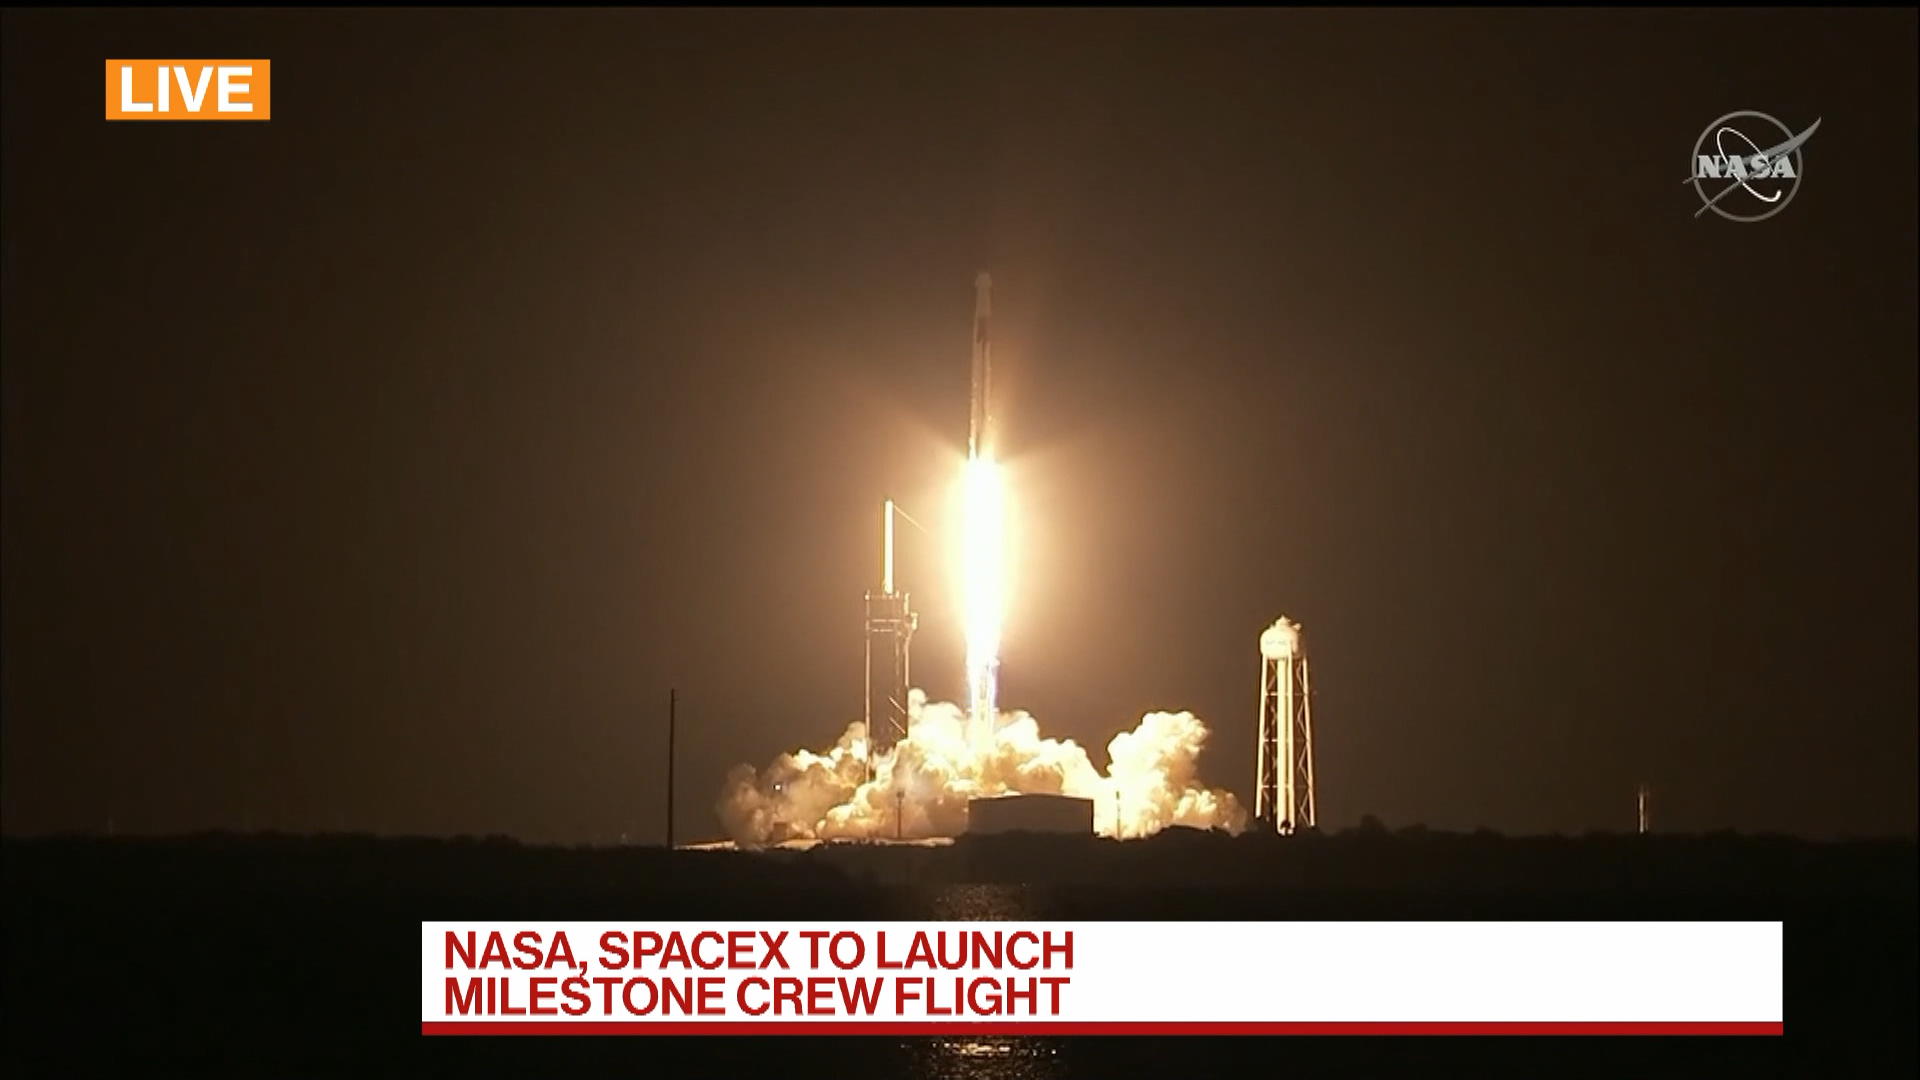 Watch as NASA, SpaceX Launch First Regular Crew Mission